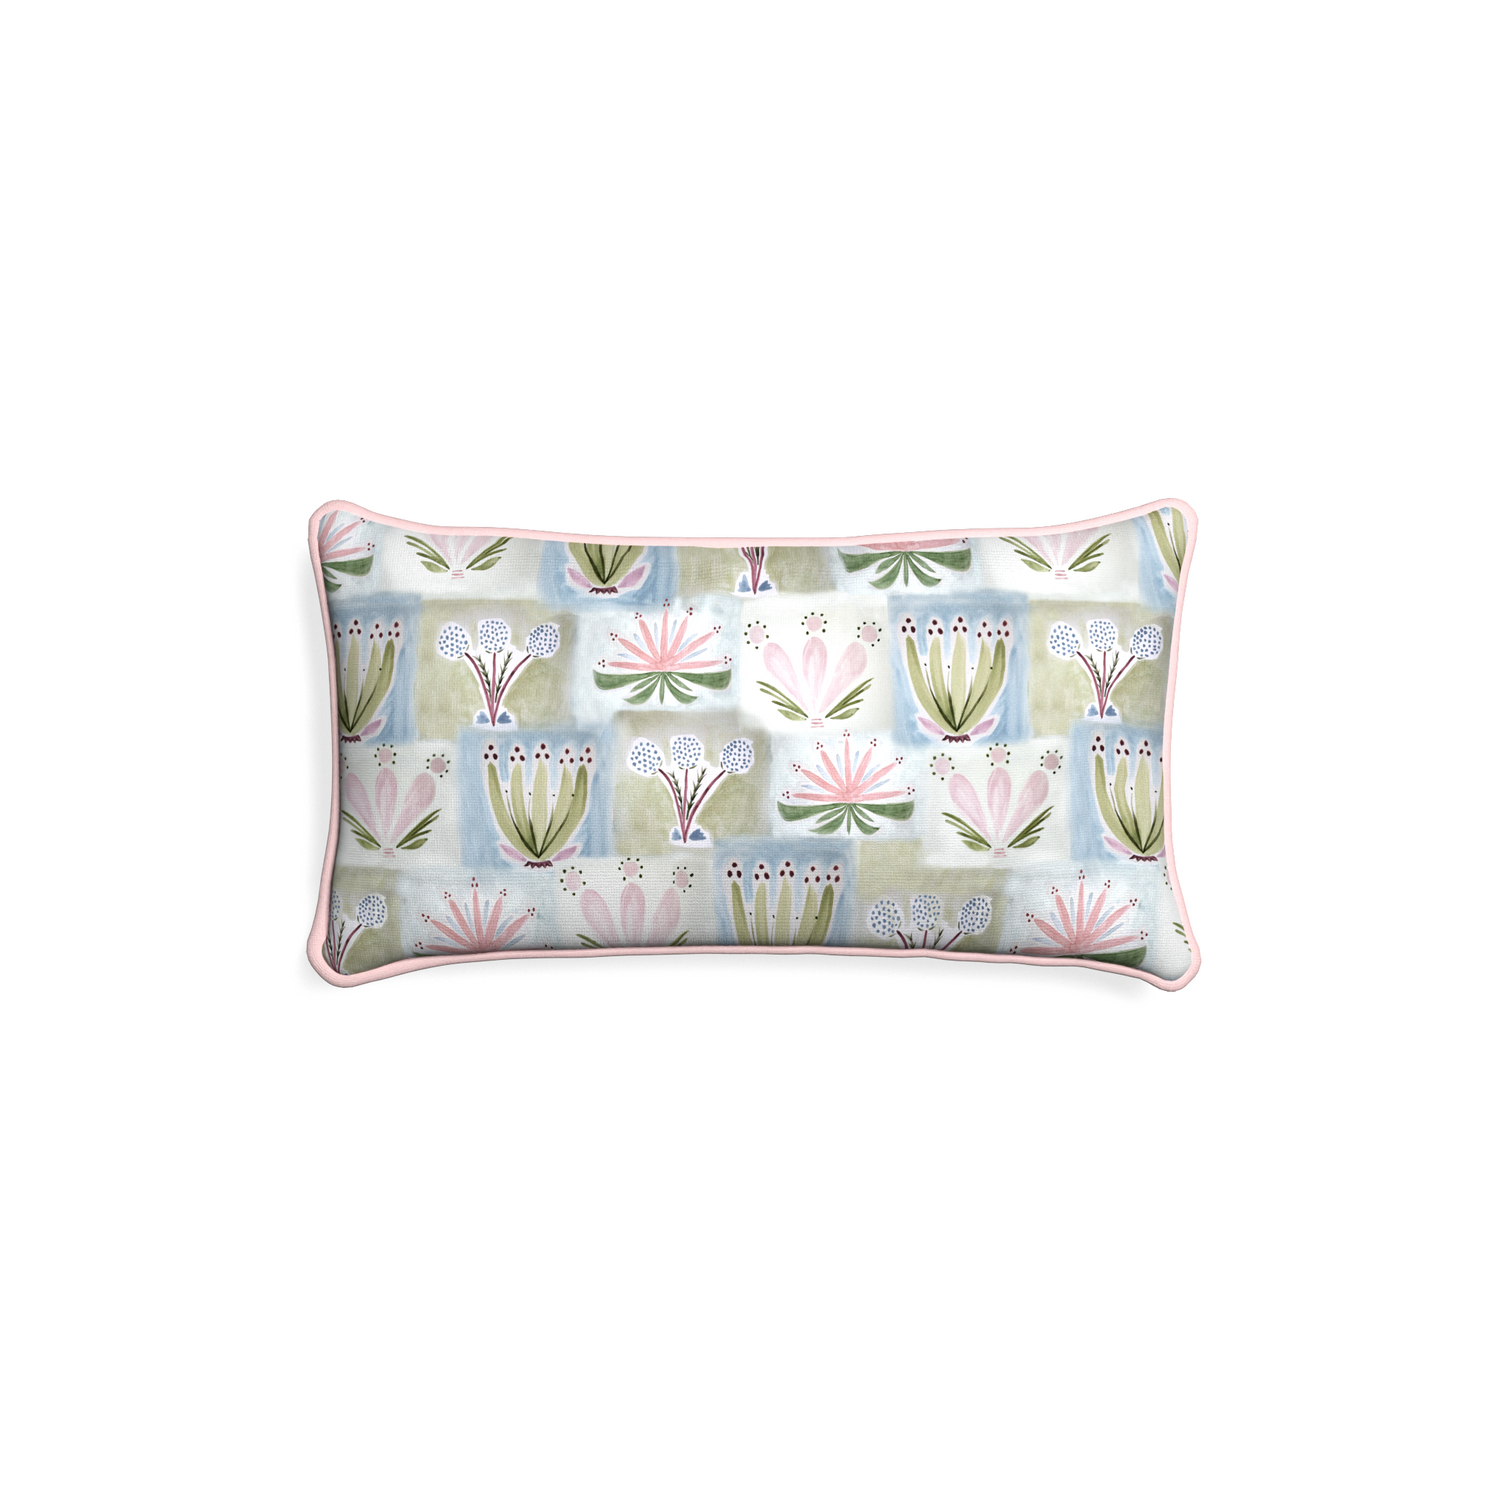 Petite-lumbar harper custom hand-painted floralpillow with petal piping on white background